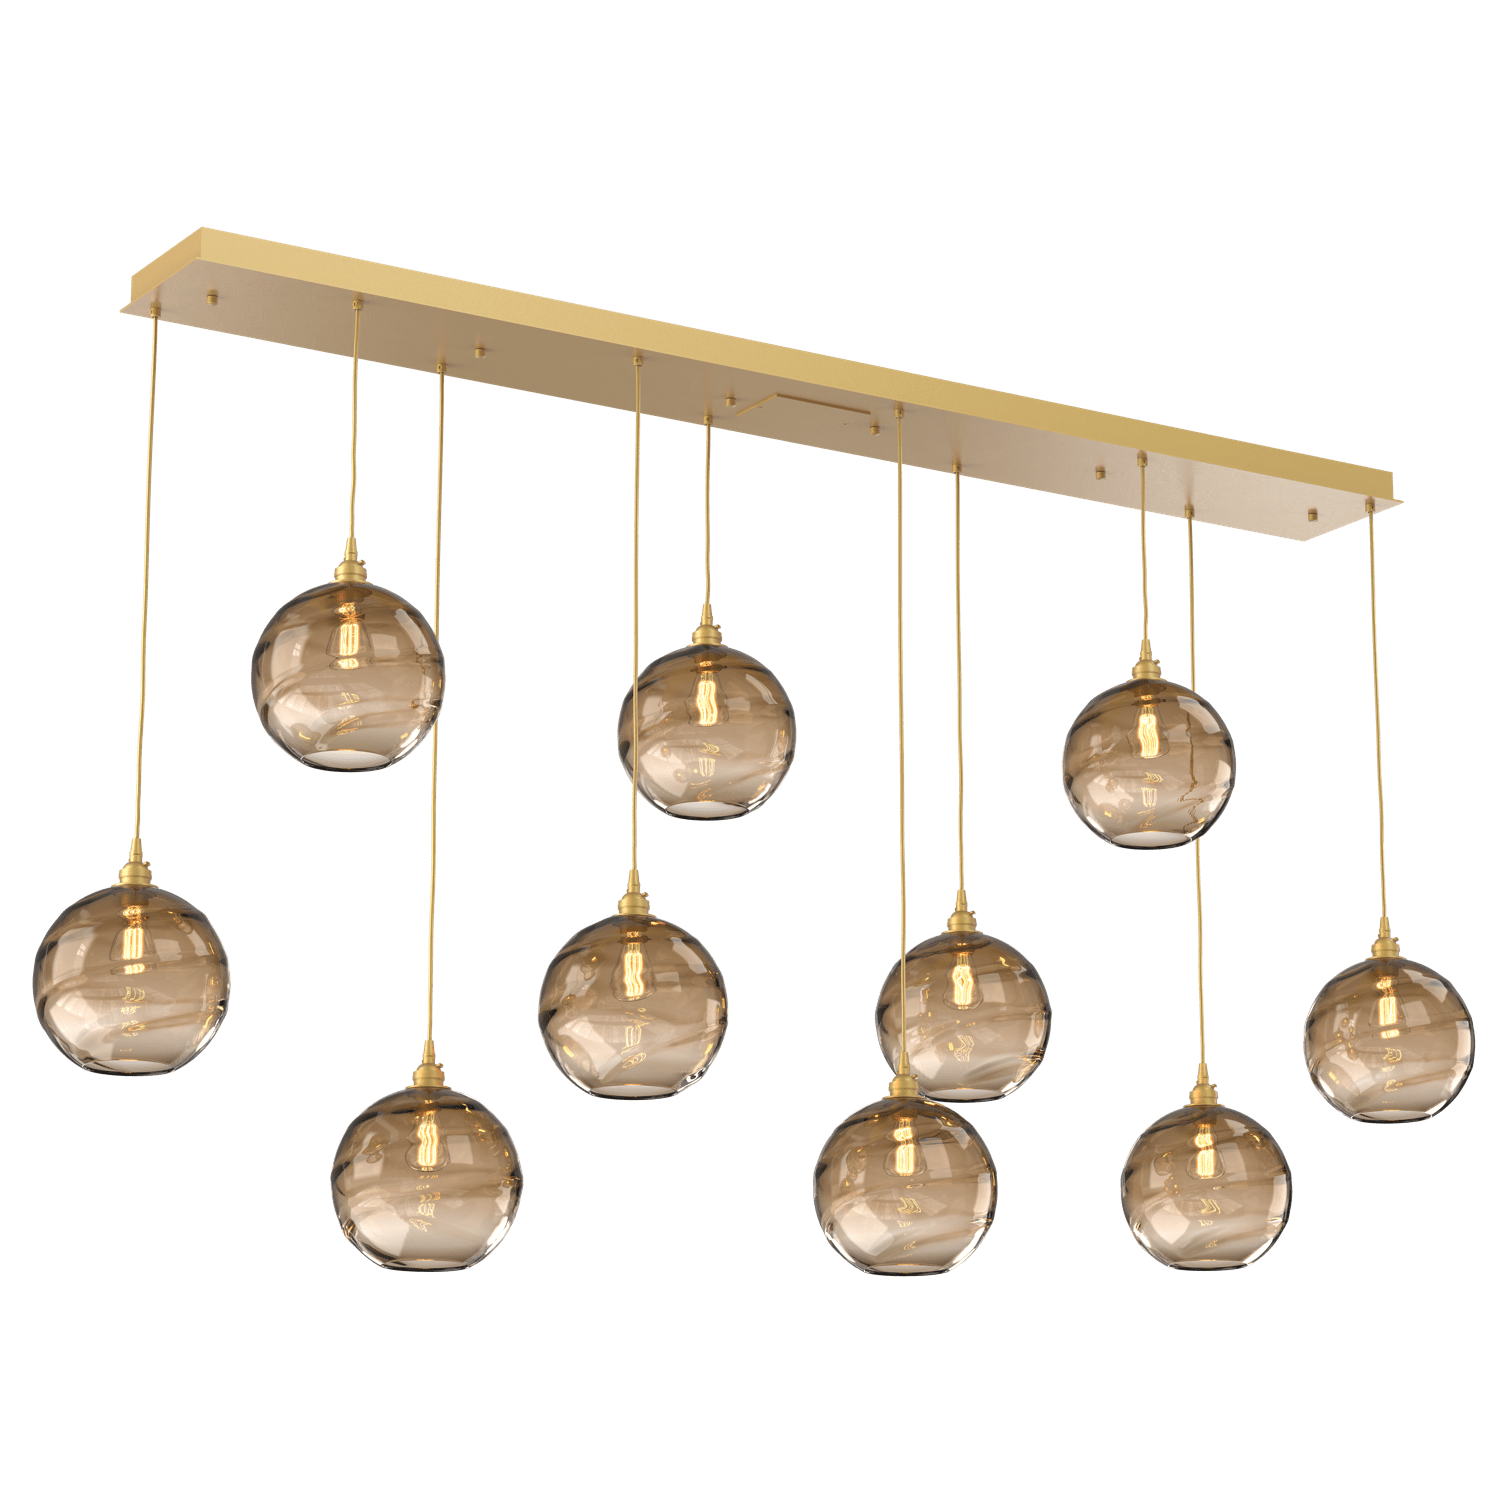 PLB0047-10-GB-OB-Hammerton-Studio-Optic-Blown-Glass-Terra-10-light-linear-pendant-chandelier-with-gilded-brass-finish-and-optic-bronze-blown-glass-shades-and-incandescent-lamping